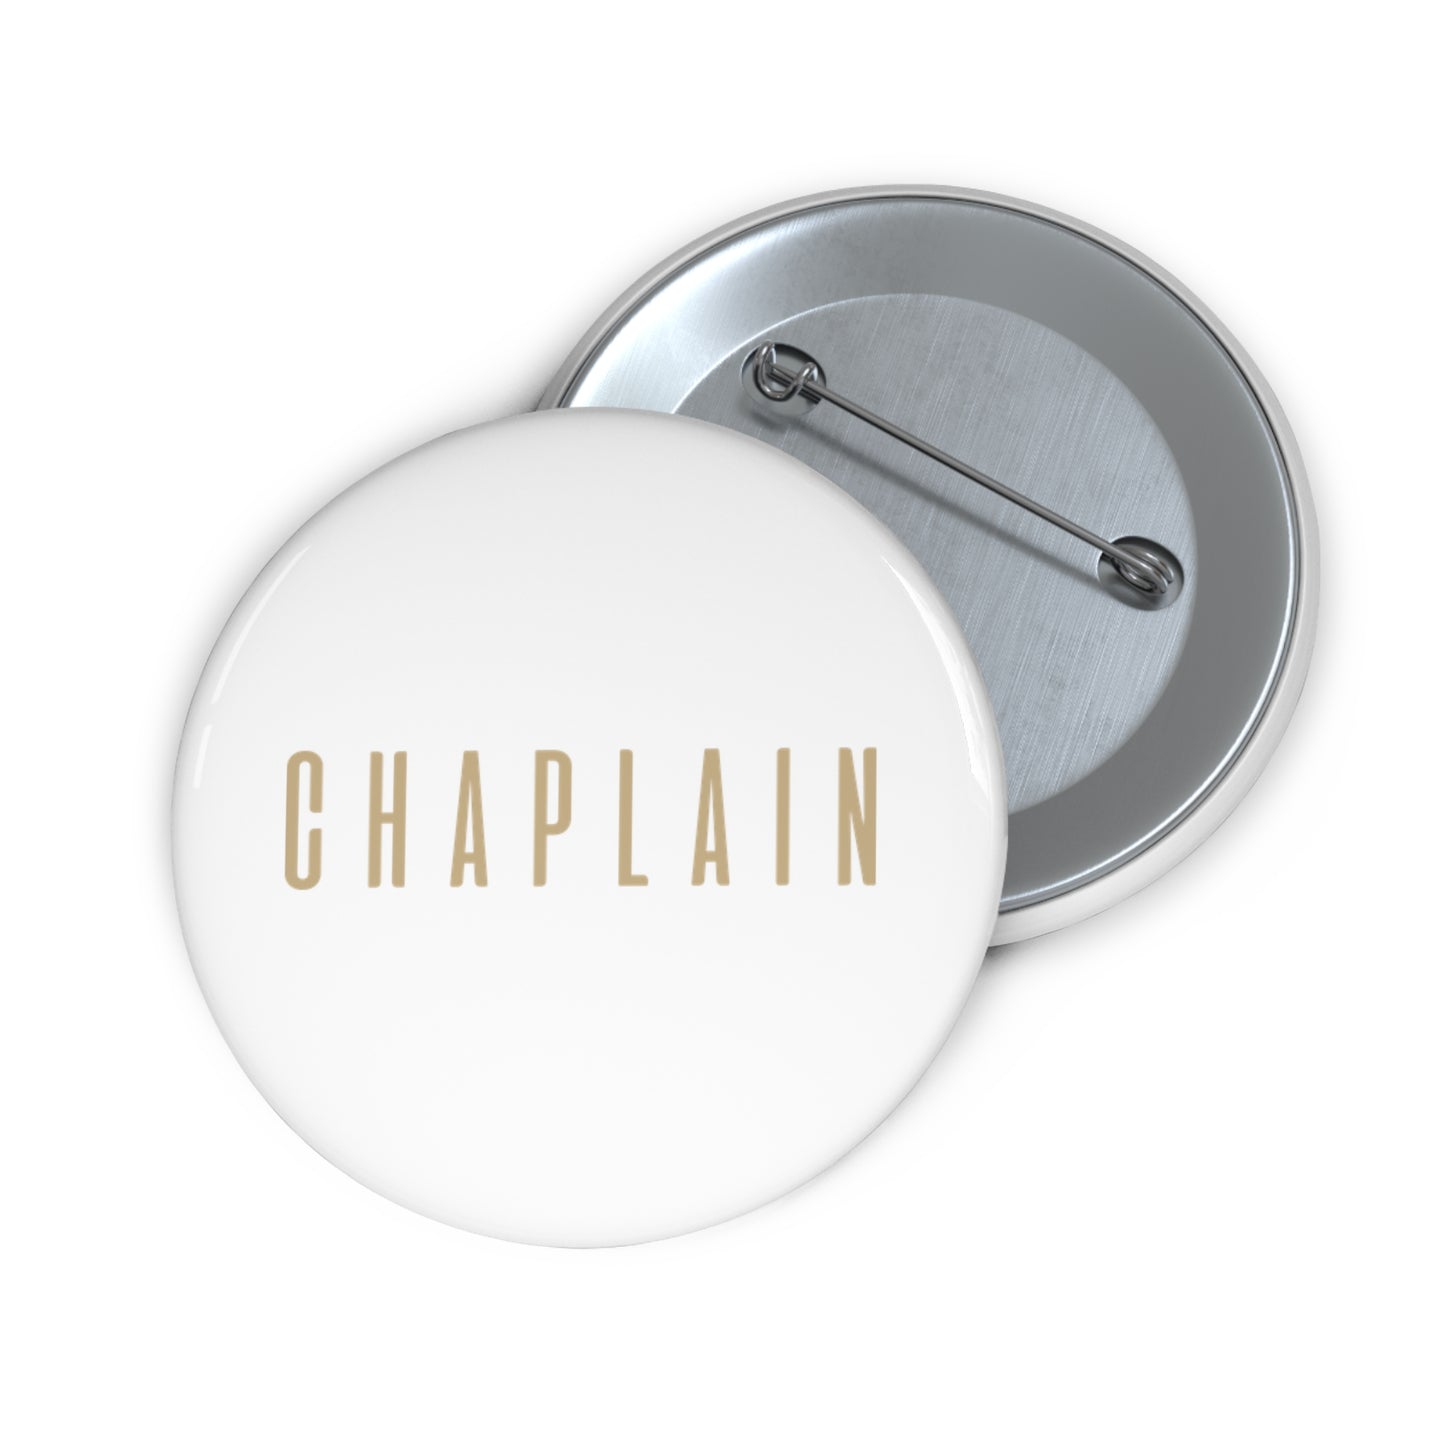 Chaplain Pin Buttons, Chaplain Gifts by Chaplain Life®